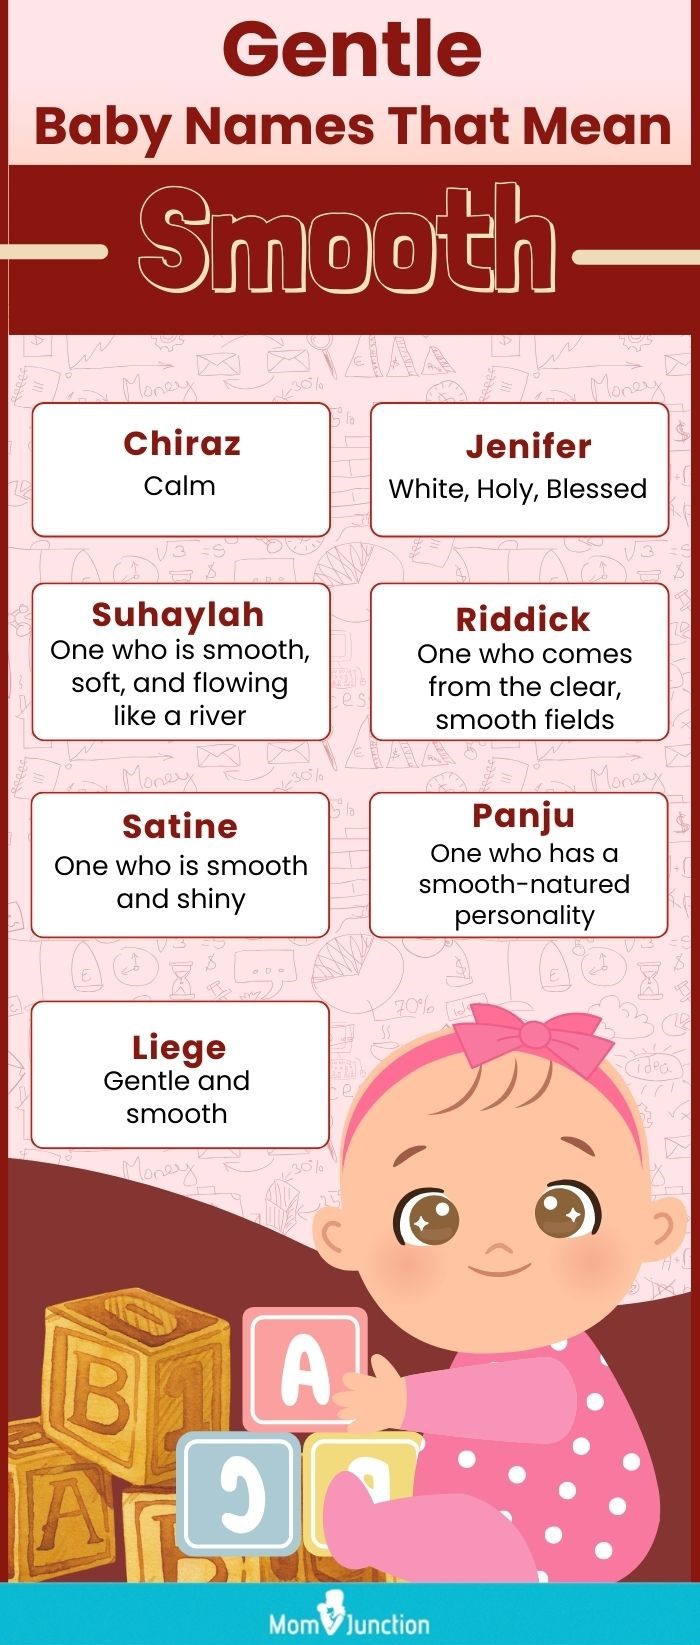 gentle baby names that mean smooth (infographic)